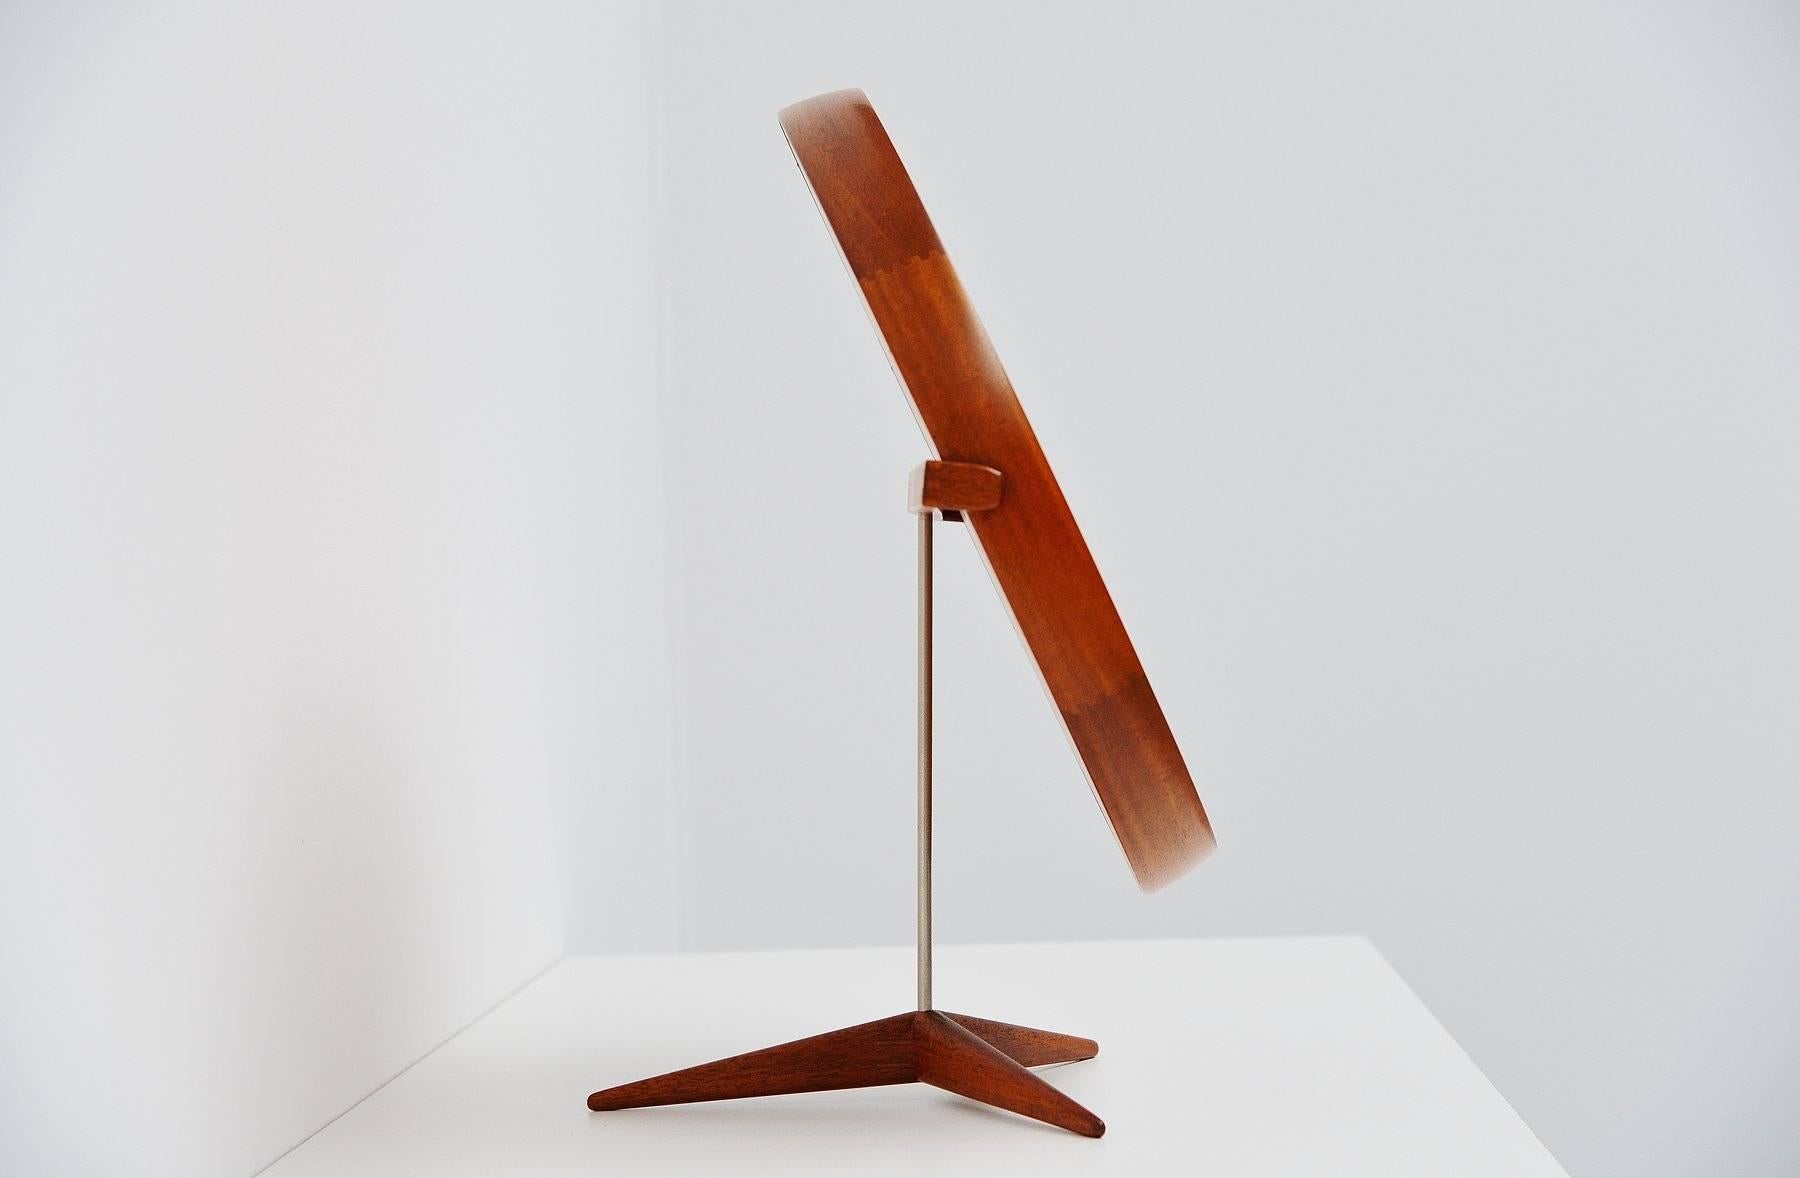 Super shaped teak table mirror designed by Uno and Osten Kristiansson for Luxus, Sweden, 1960. This solid teak mirror is very well crafted with nice dovetail connections in the rim and tripod base. Probably one of the nicest table mirrors ever made.